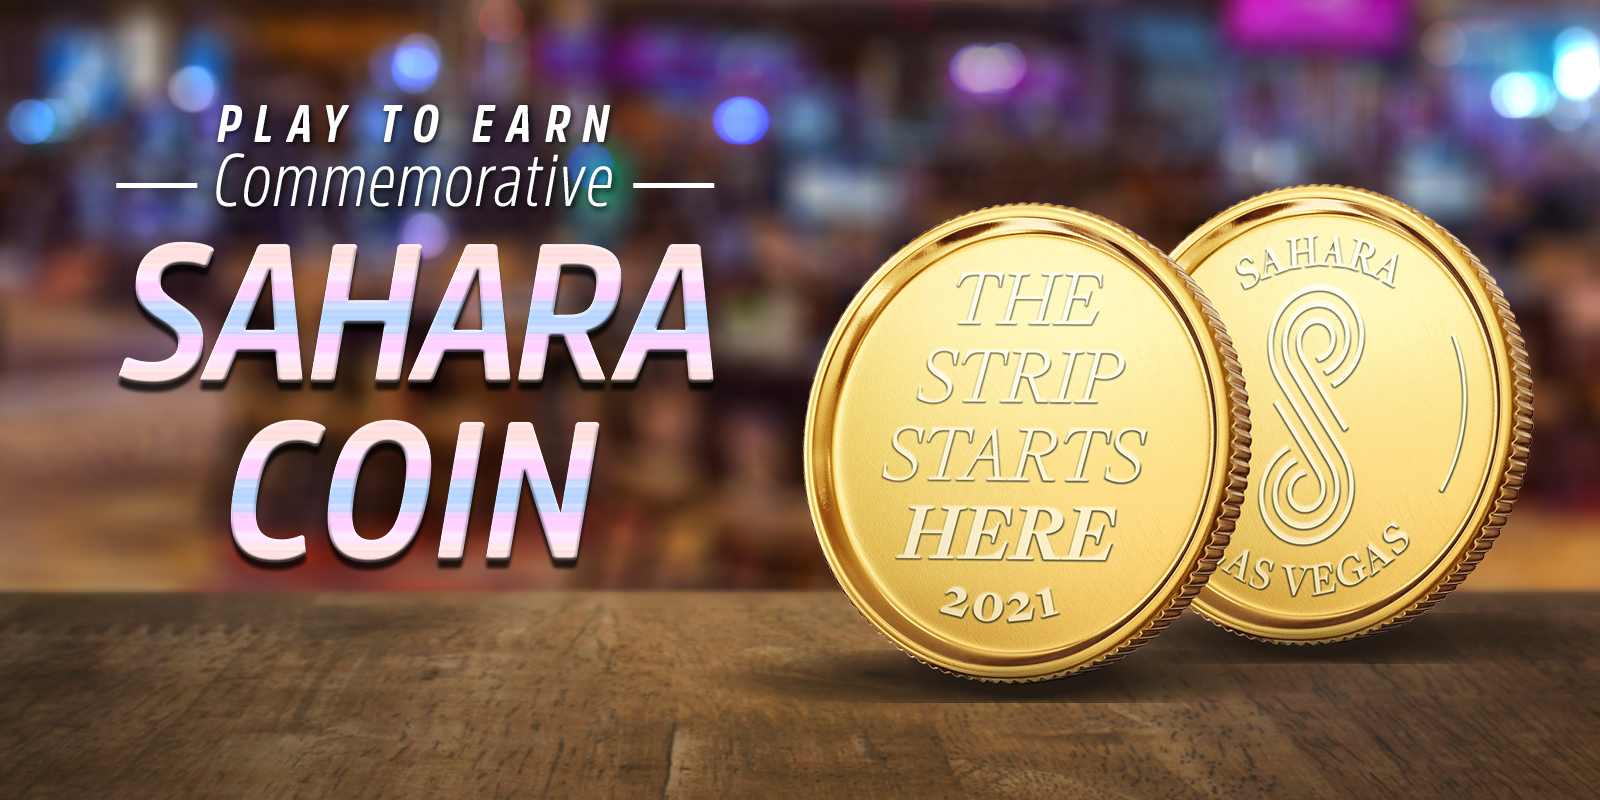 Play To Earn Commemorative SAHARA Coin - Creative has a gold coin with the verbiage of "The Strip Starts Here"